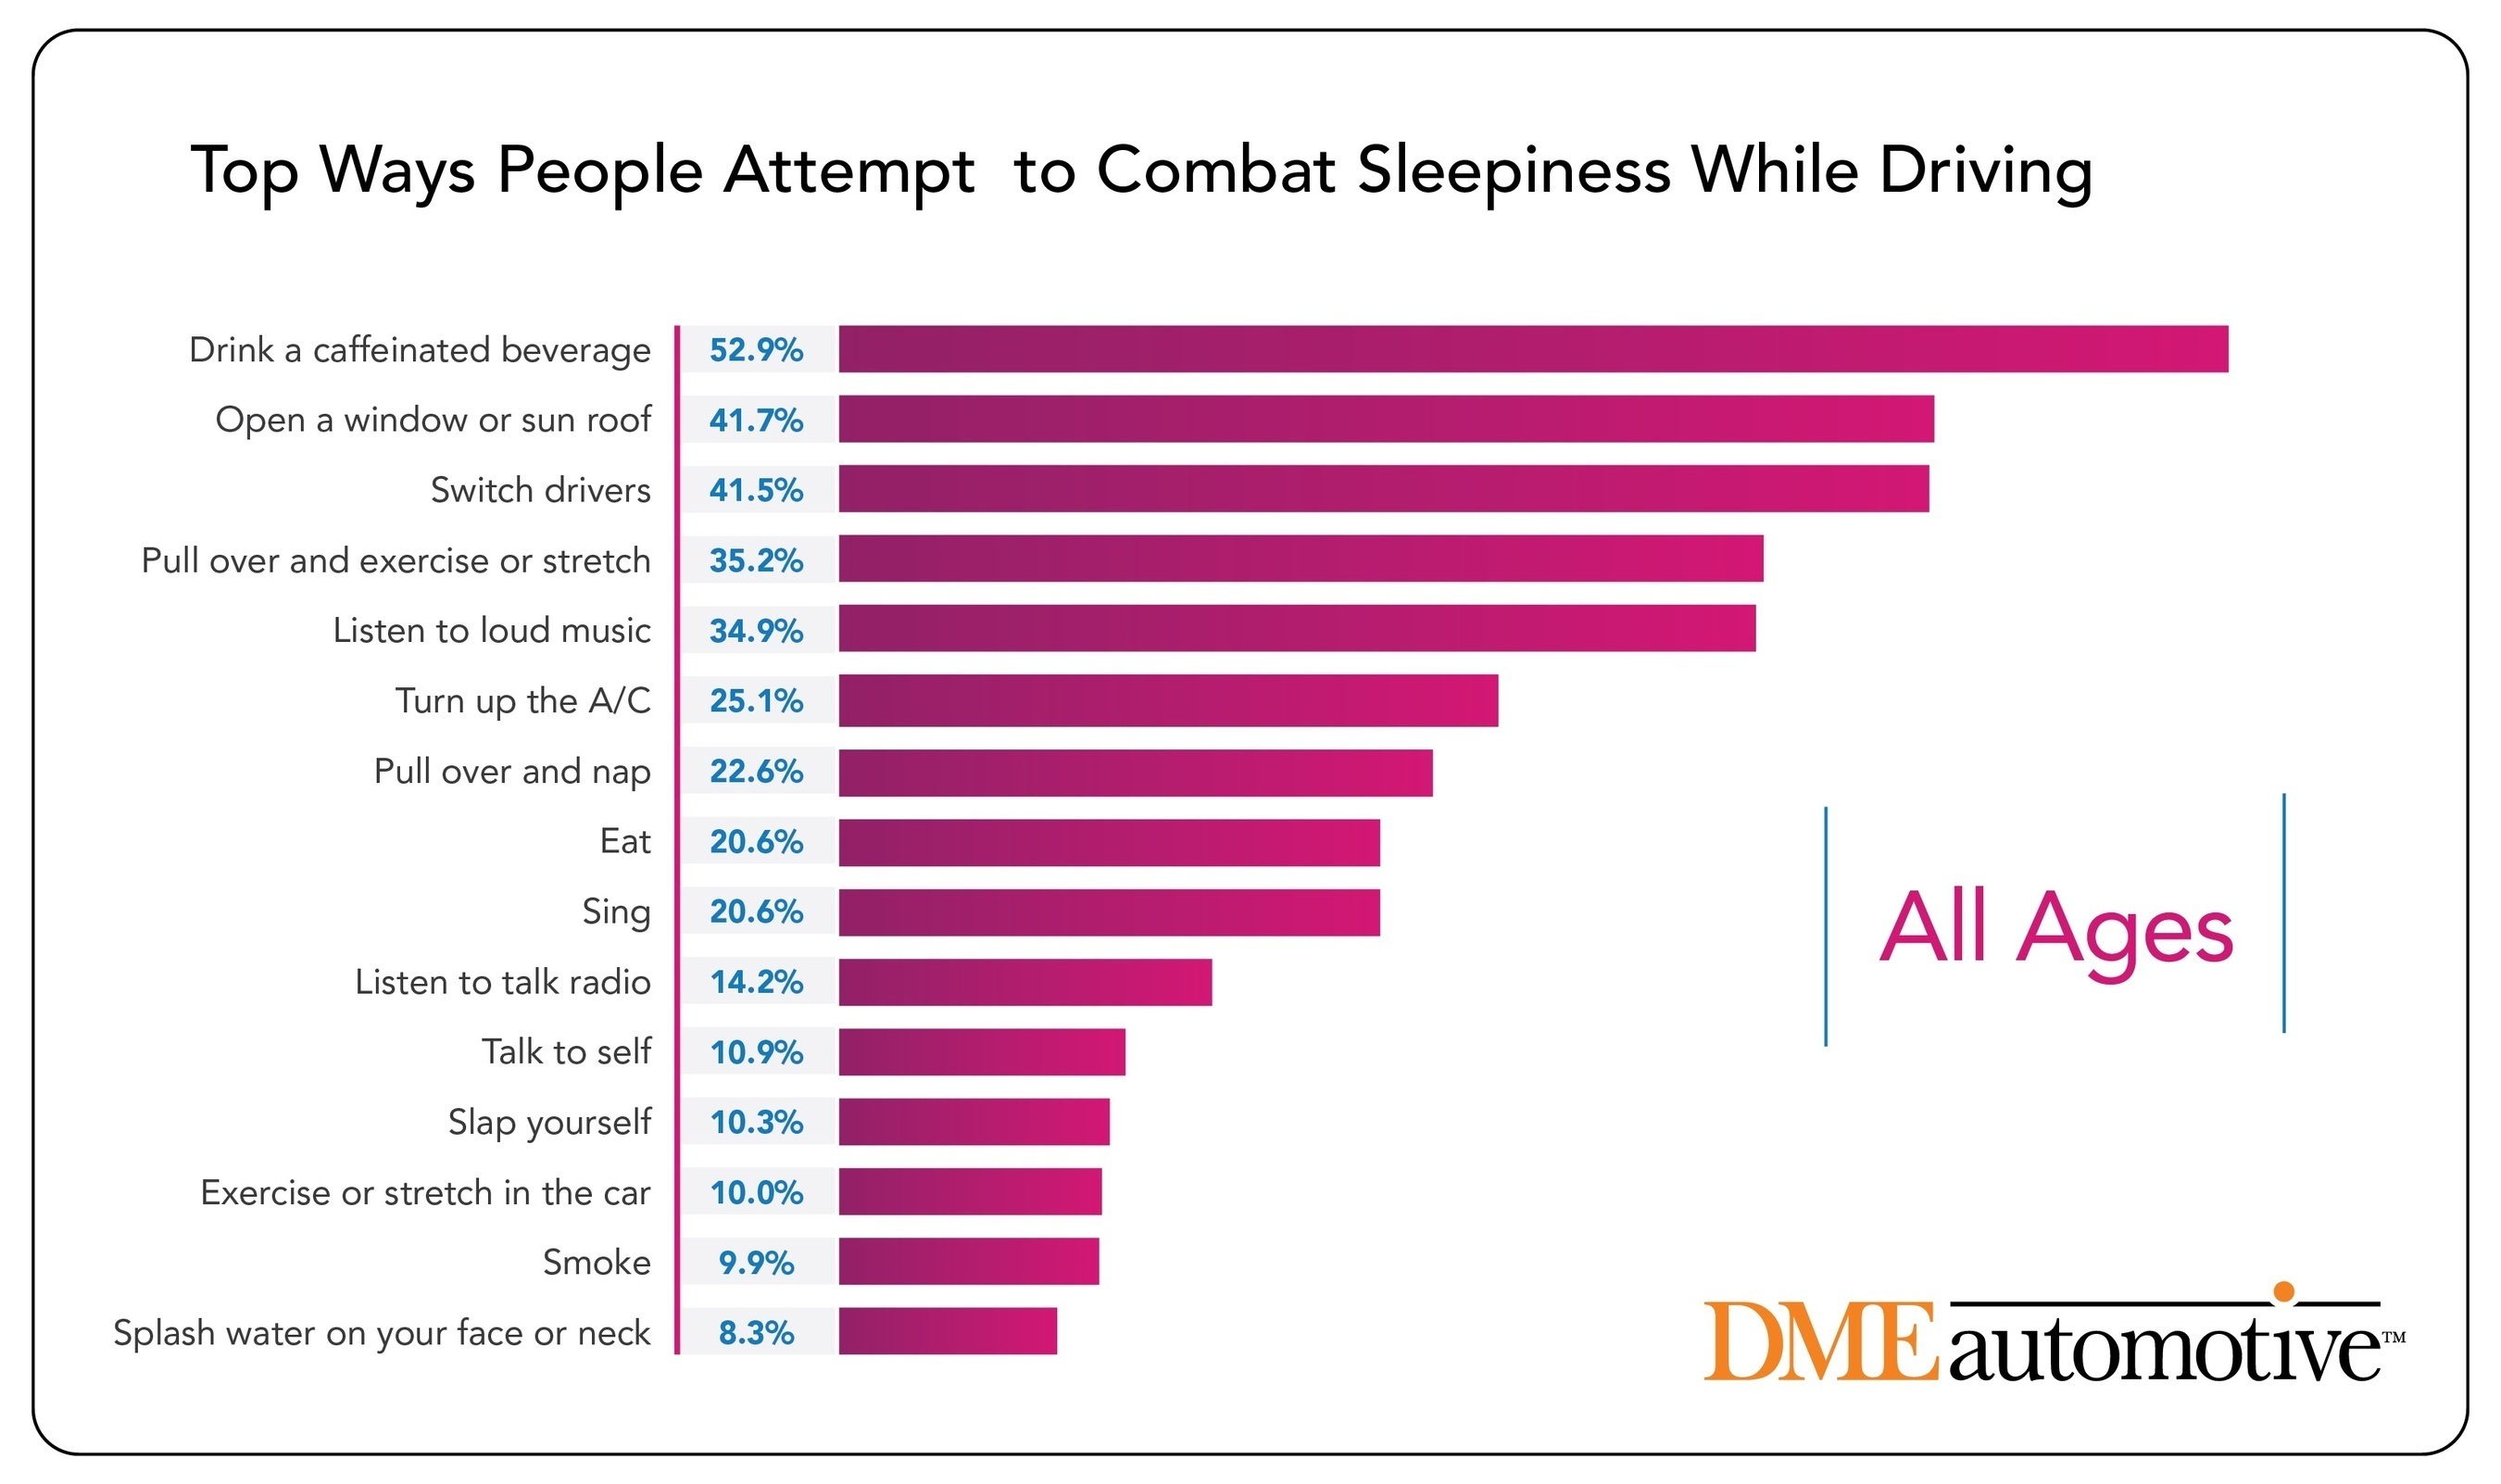 New DMEautomotive Research: The Top Ways People Attempt to Combat Sleepiness While Driving. (PRNewsFoto/DMEautomotive)